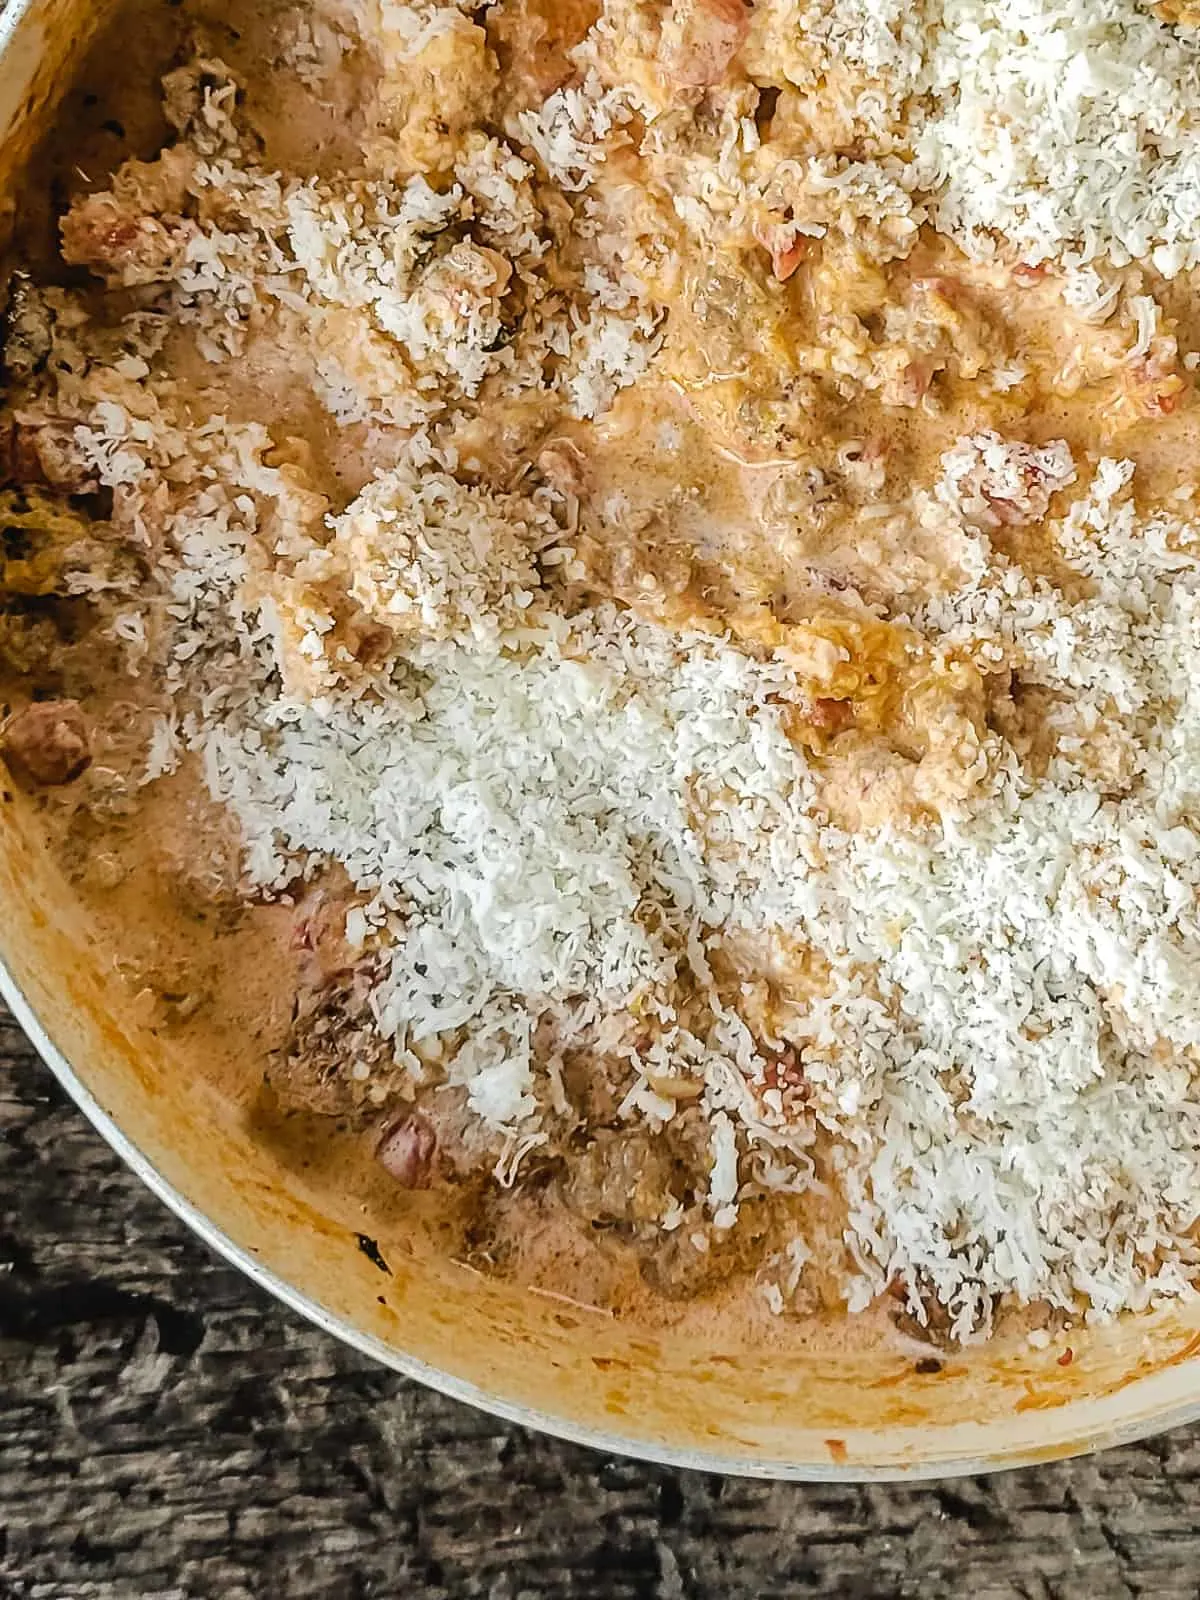 Creamy tomato sauce with ground sausage, sprinkled with Parmesan cheese.